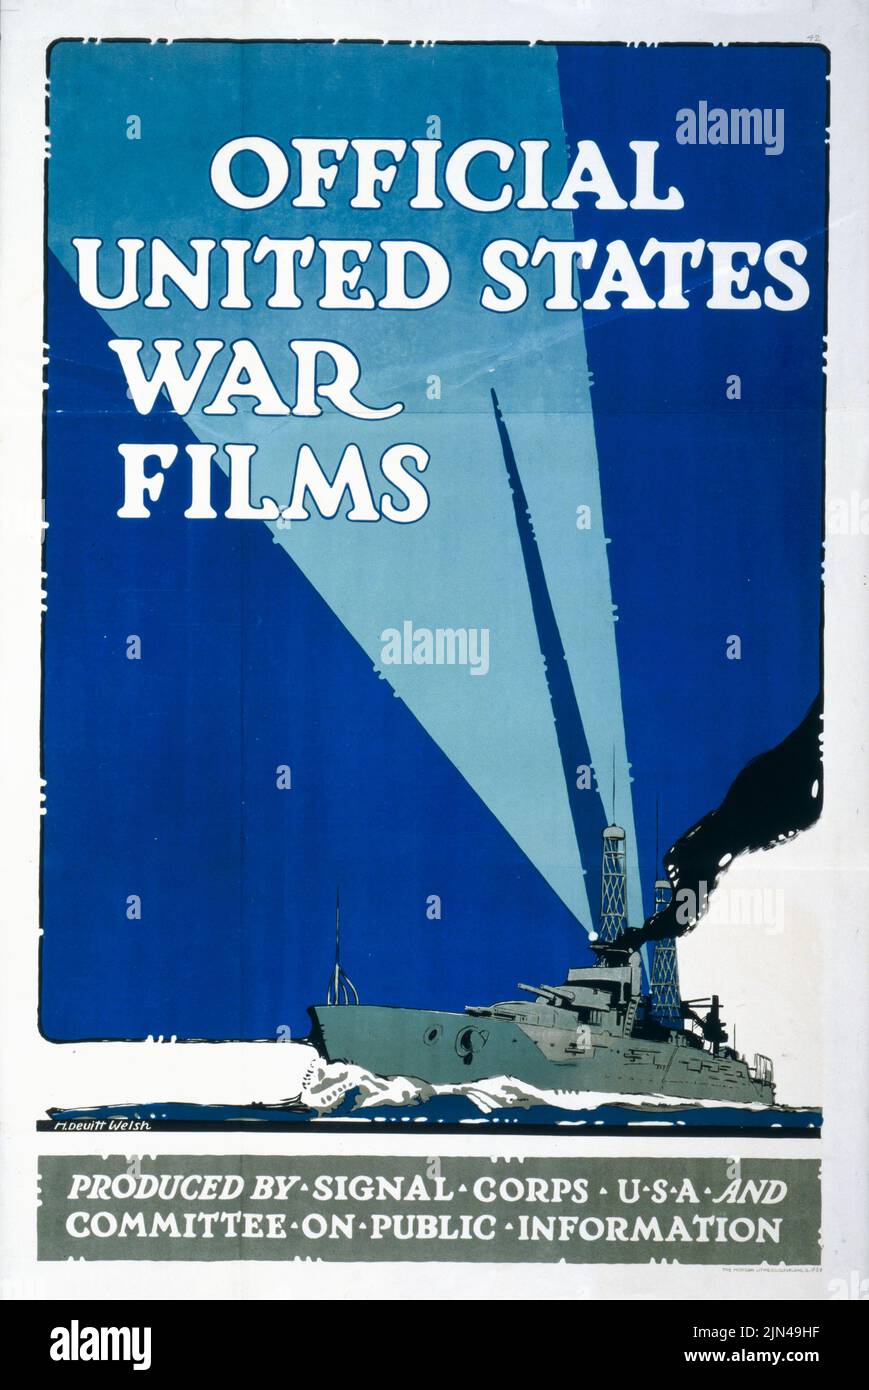 Official United States war films, Produced by Signal Corps and Committee on Public Information (1917) American World War I era poster by Horace Devitt Welsh Stock Photo